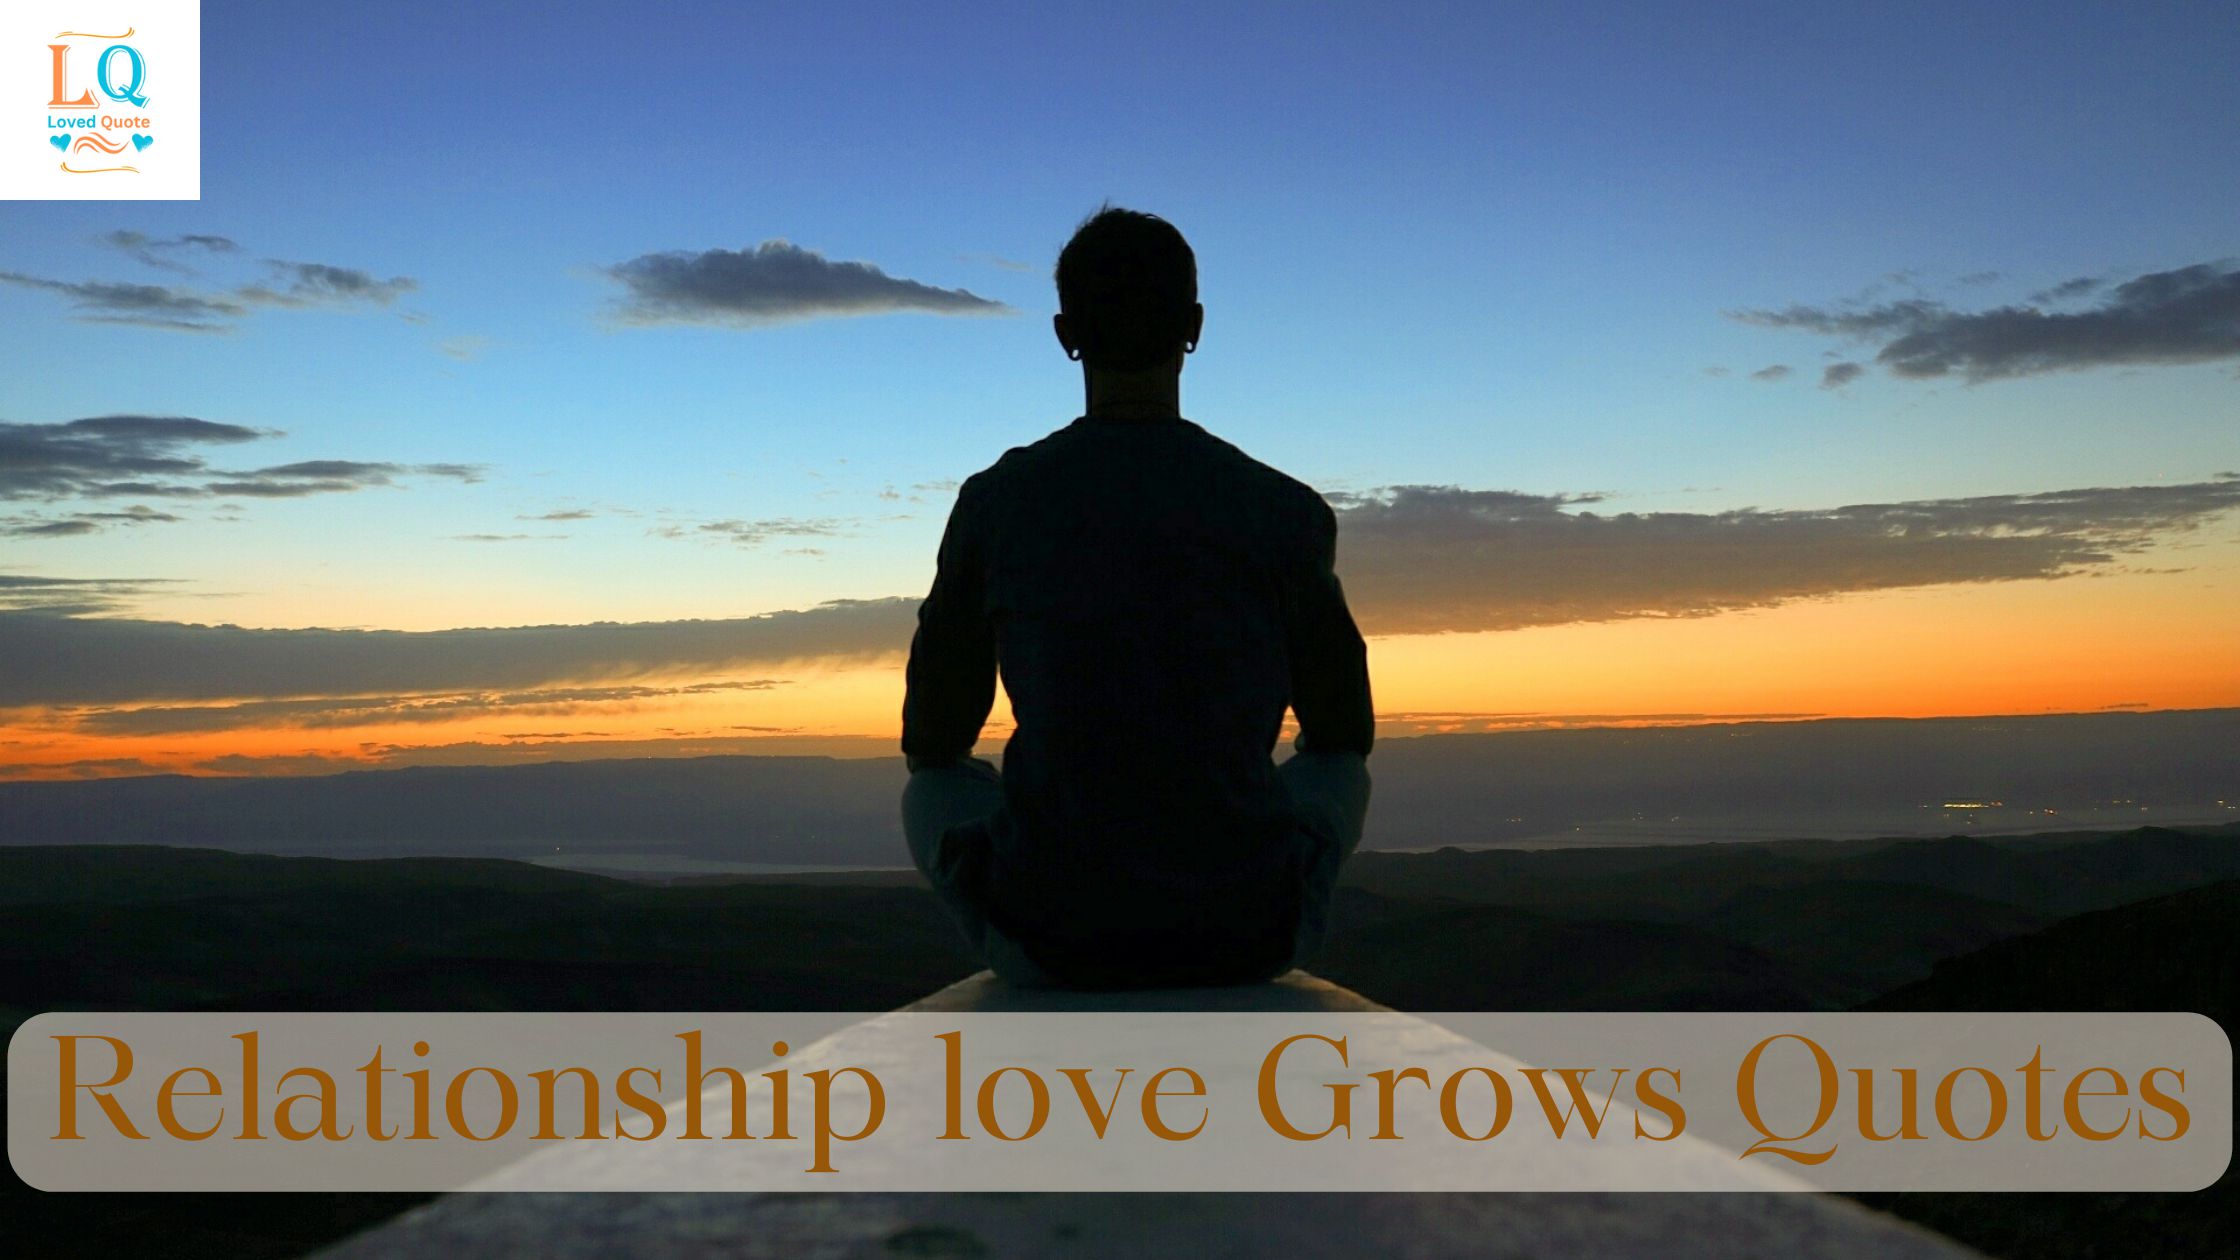 Relationship love Grows Quotes